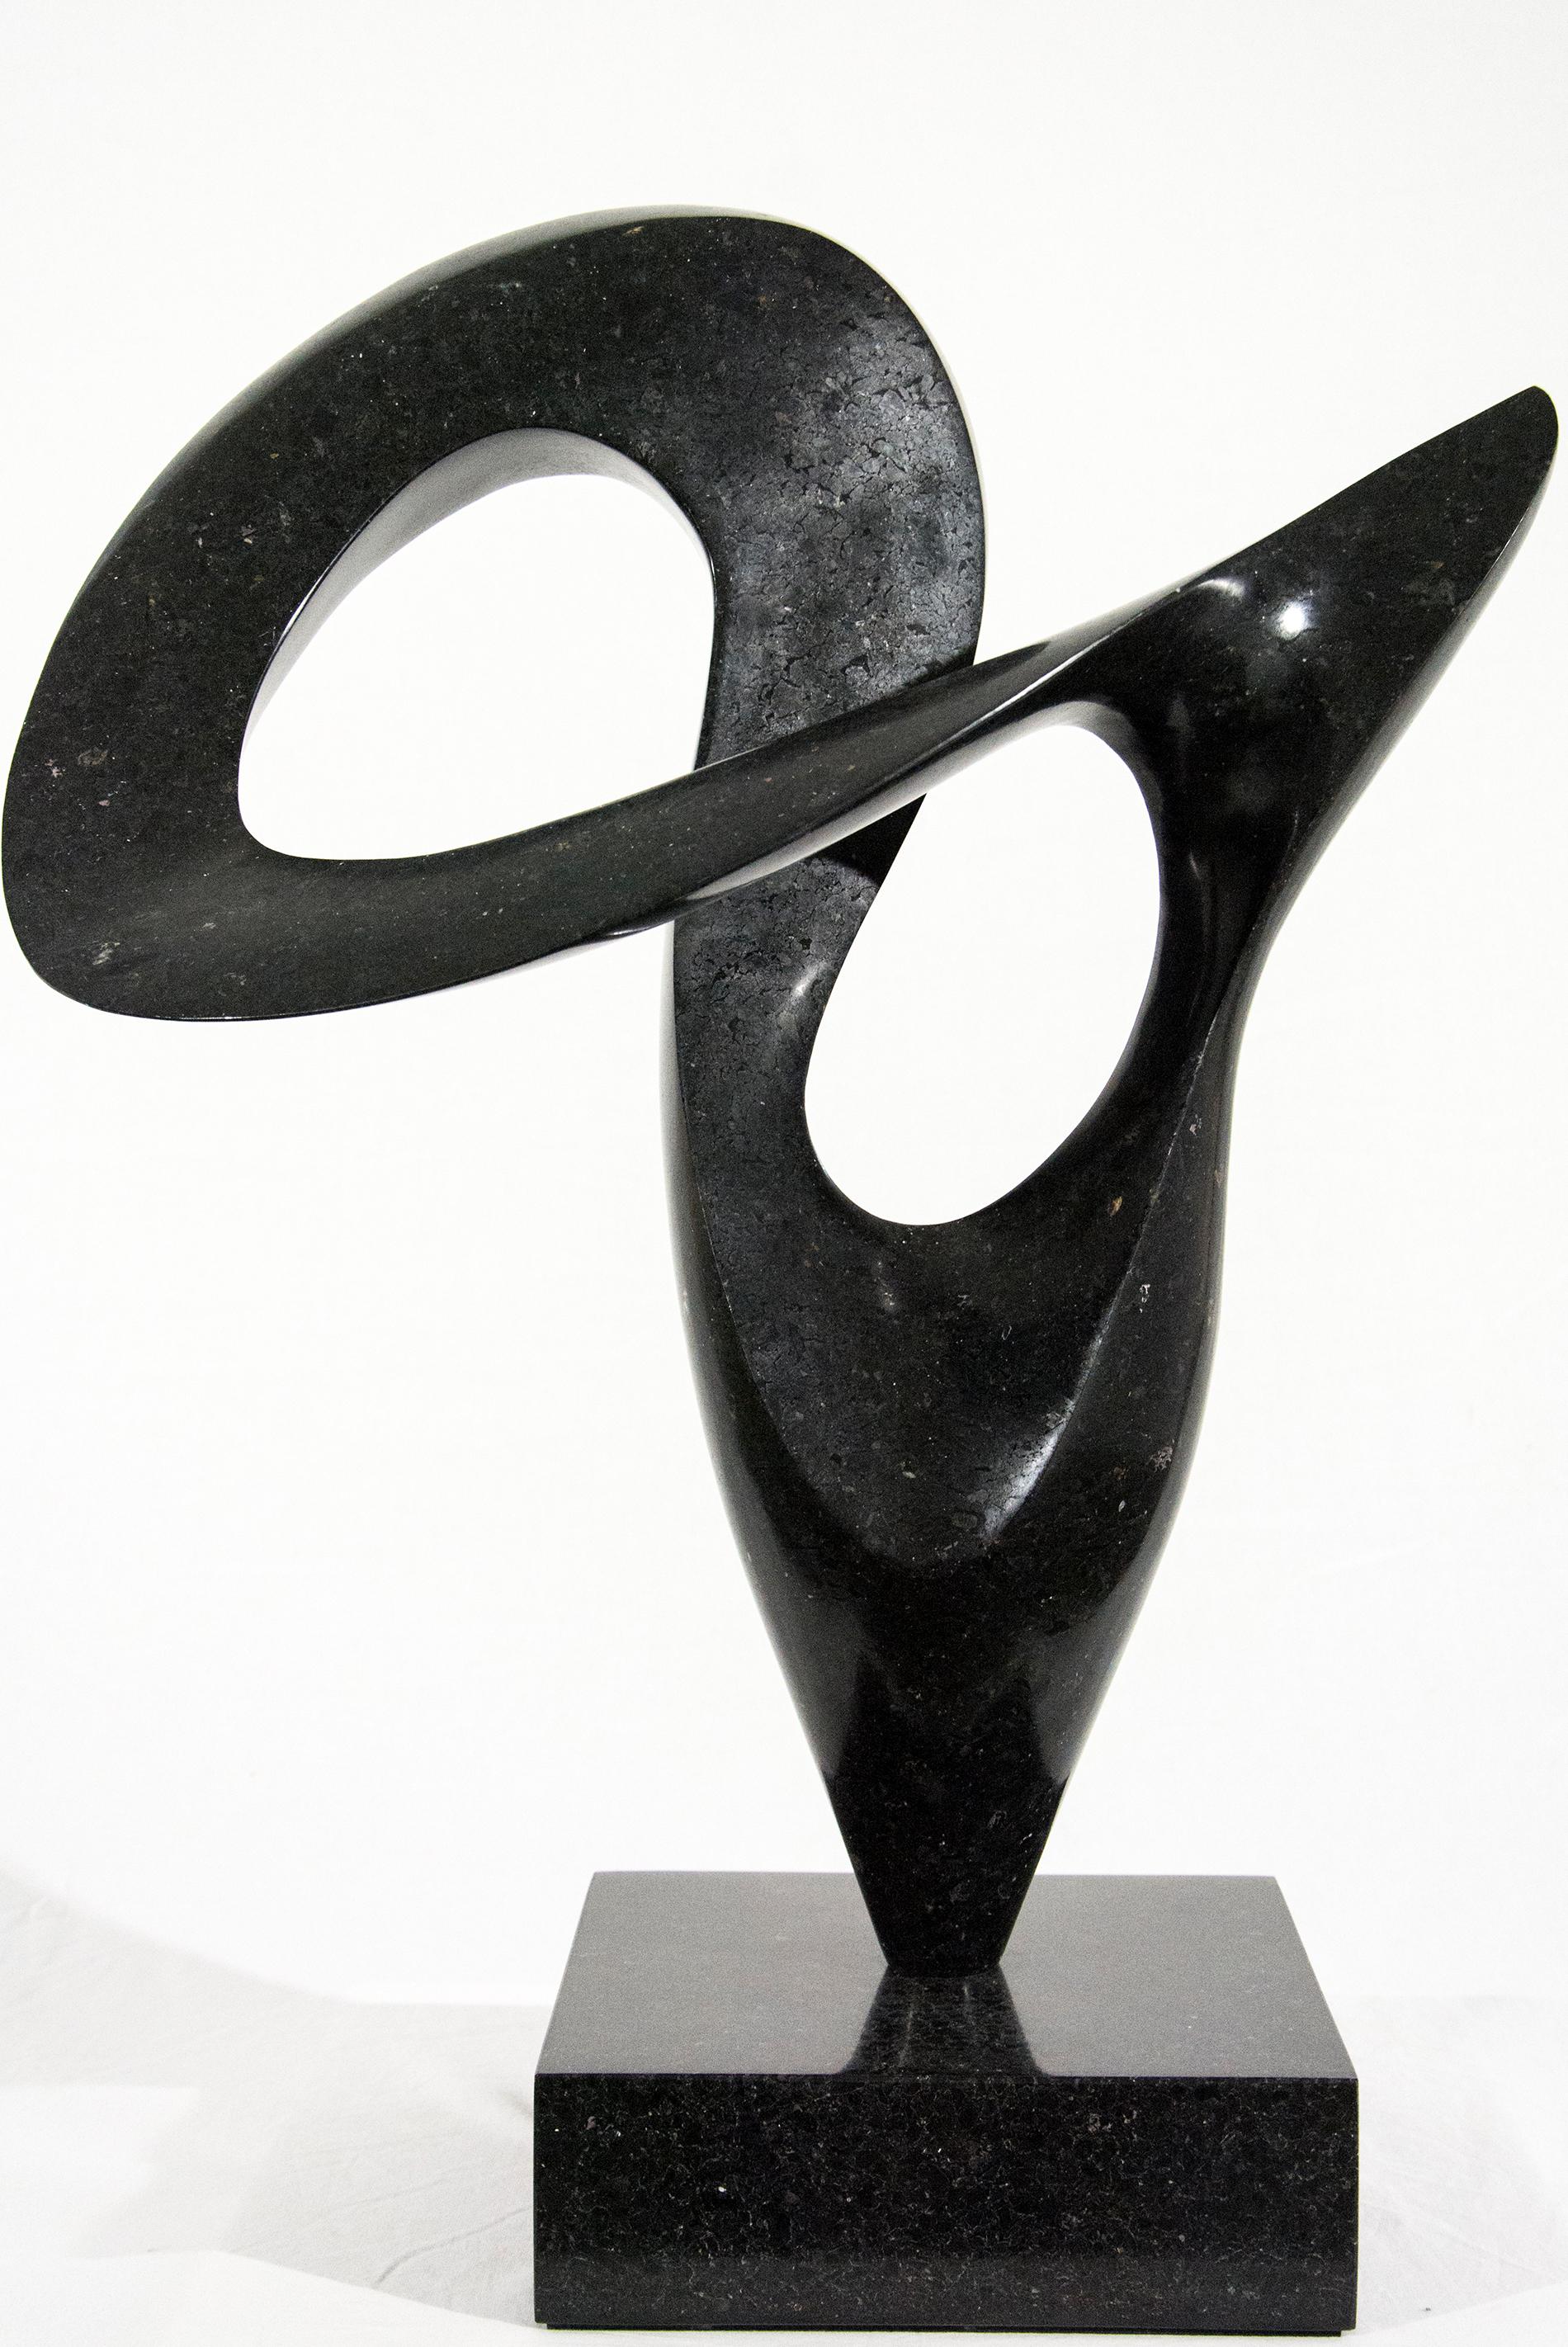 Jeremy Guy Abstract Sculpture - Pirouette 7/20